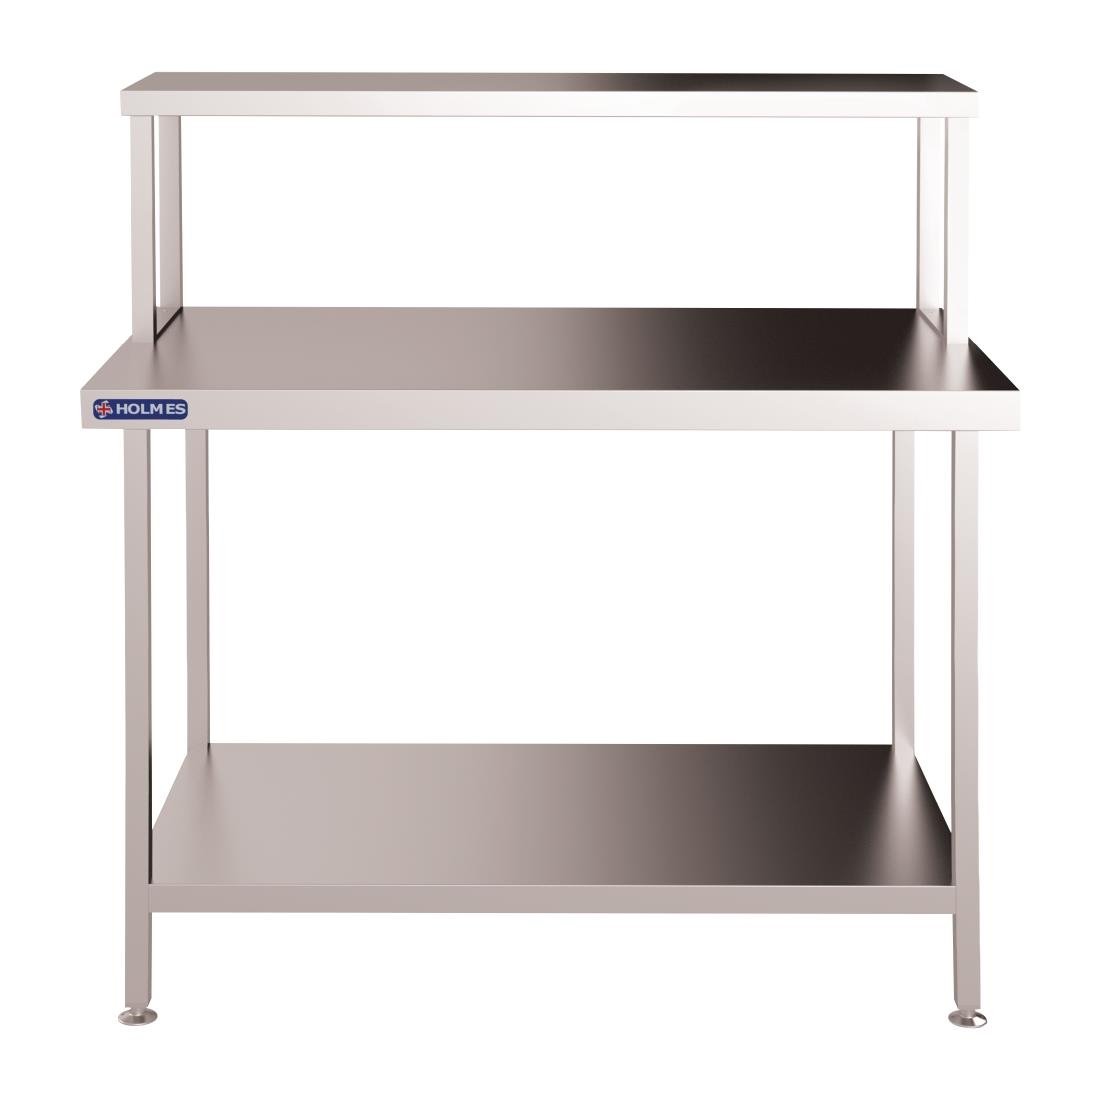 FC447 Holmes Stainless Steel Wall Prep Table Welded with Gantry 1800mm JD Catering Equipment Solutions Ltd